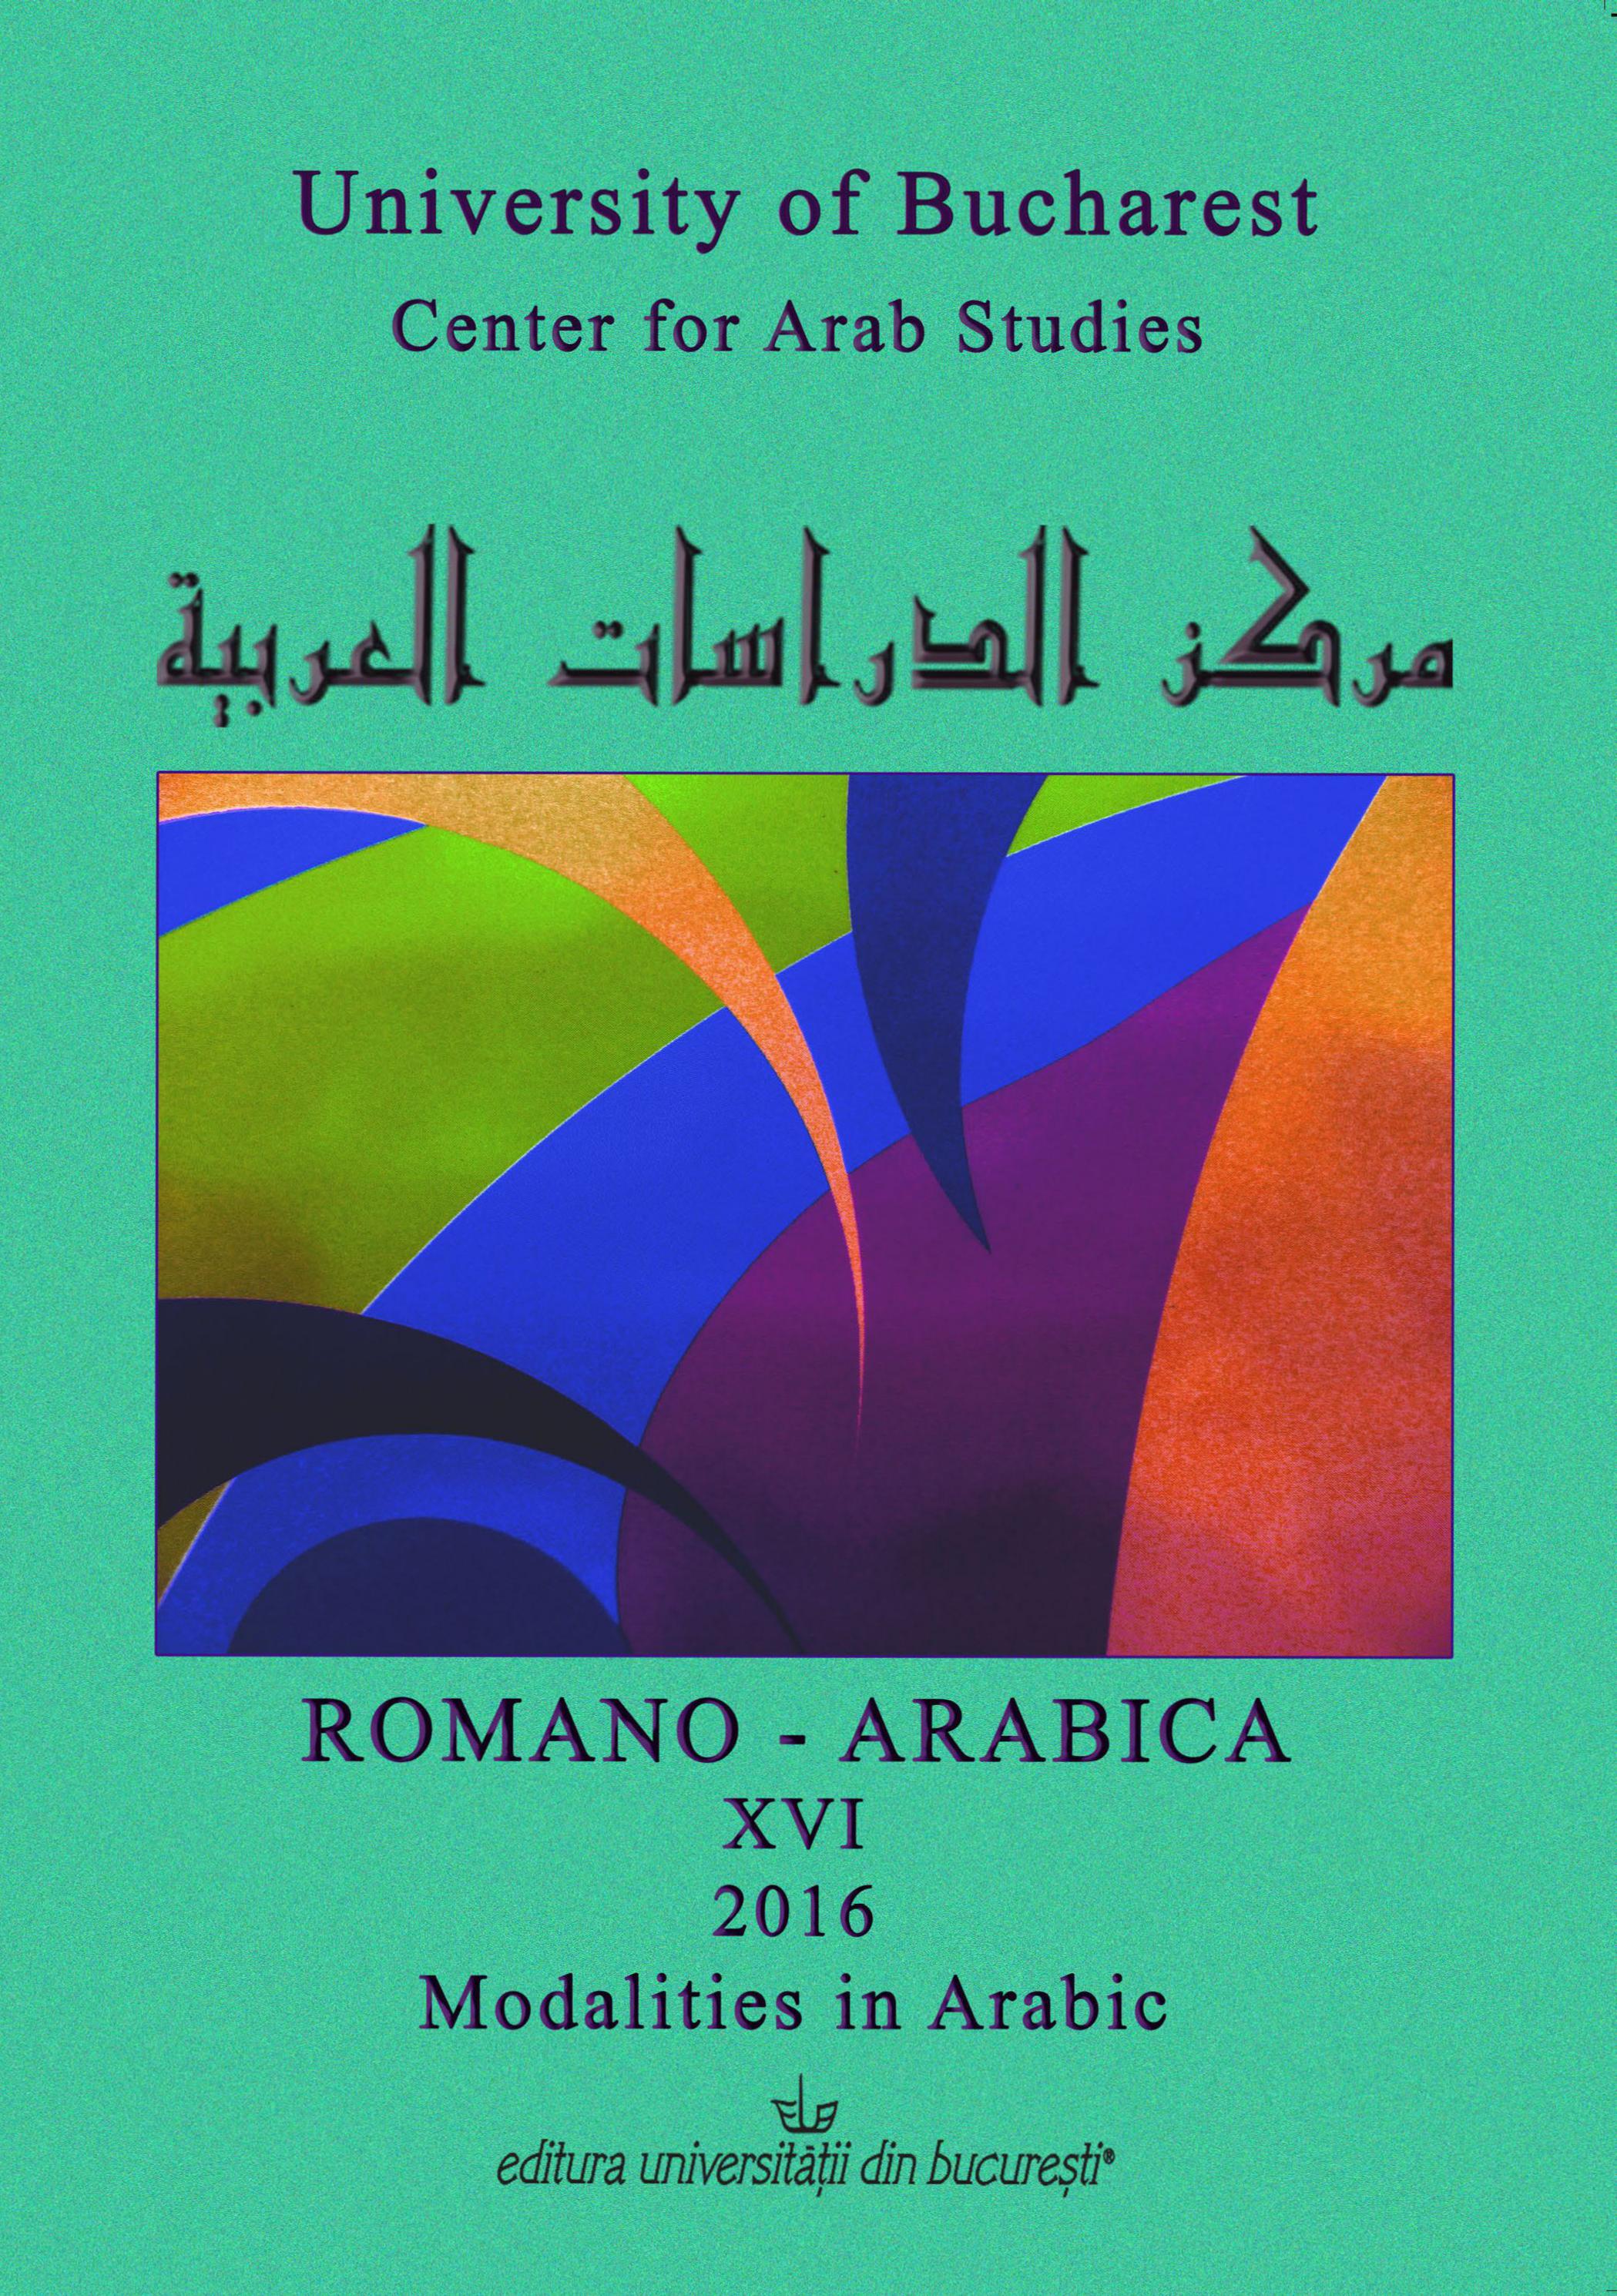 THE GRAMMATICALIZATION OF THE MODAL PARTICLES IN SOUTH IRAQI ARABIC